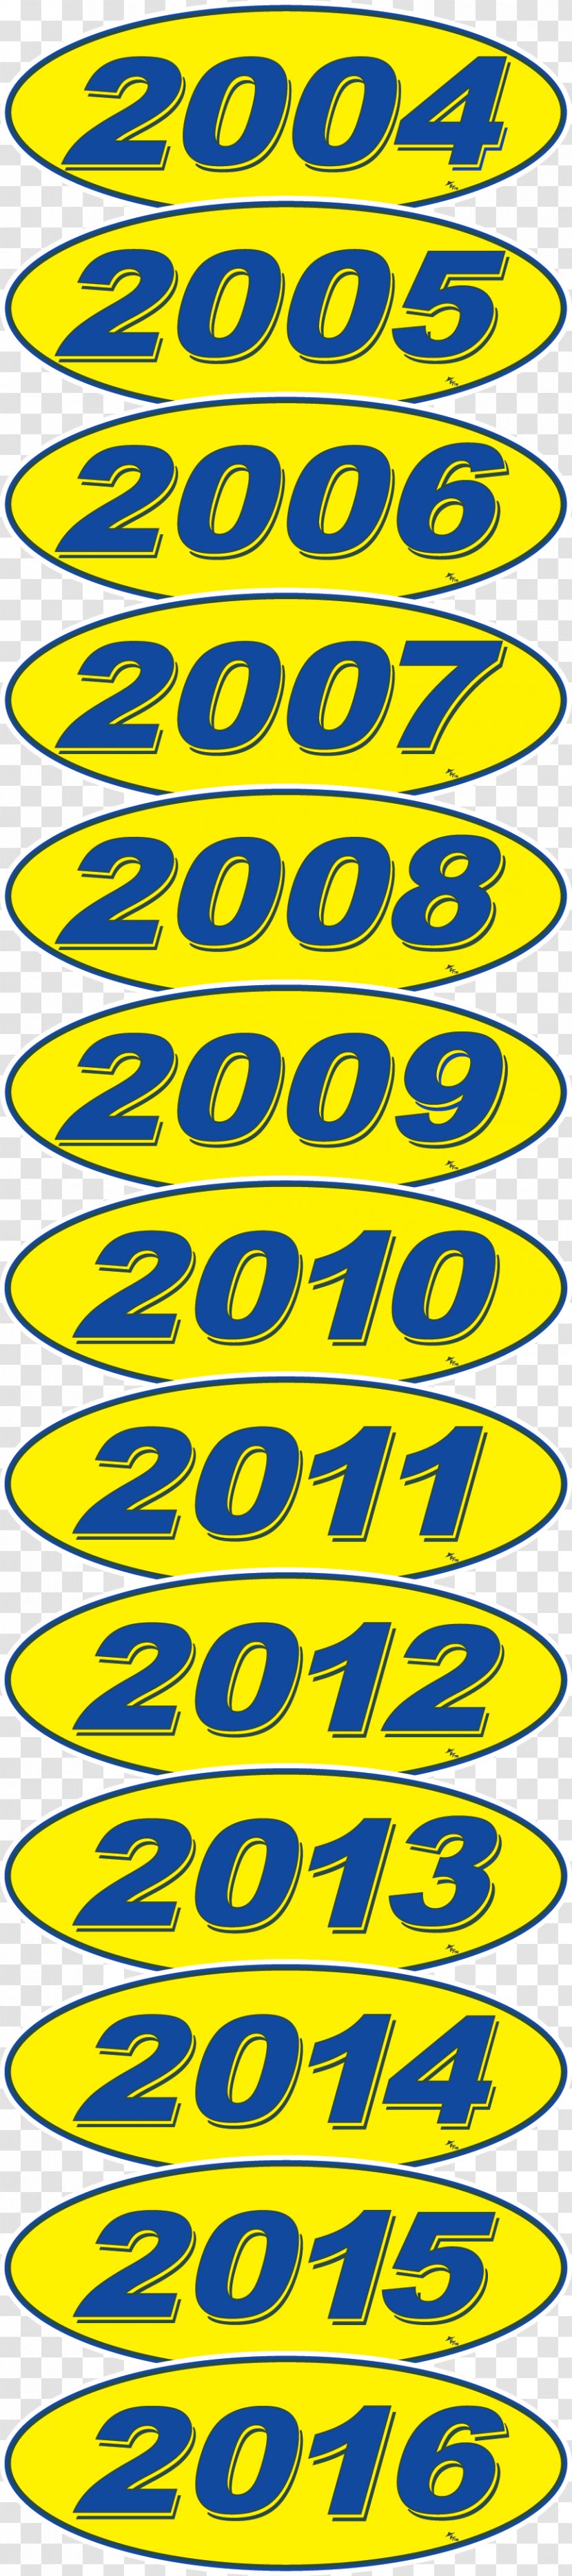 Oval Model Year Window Stickers Line Point Angle Pattern - Highlights Transparent PNG